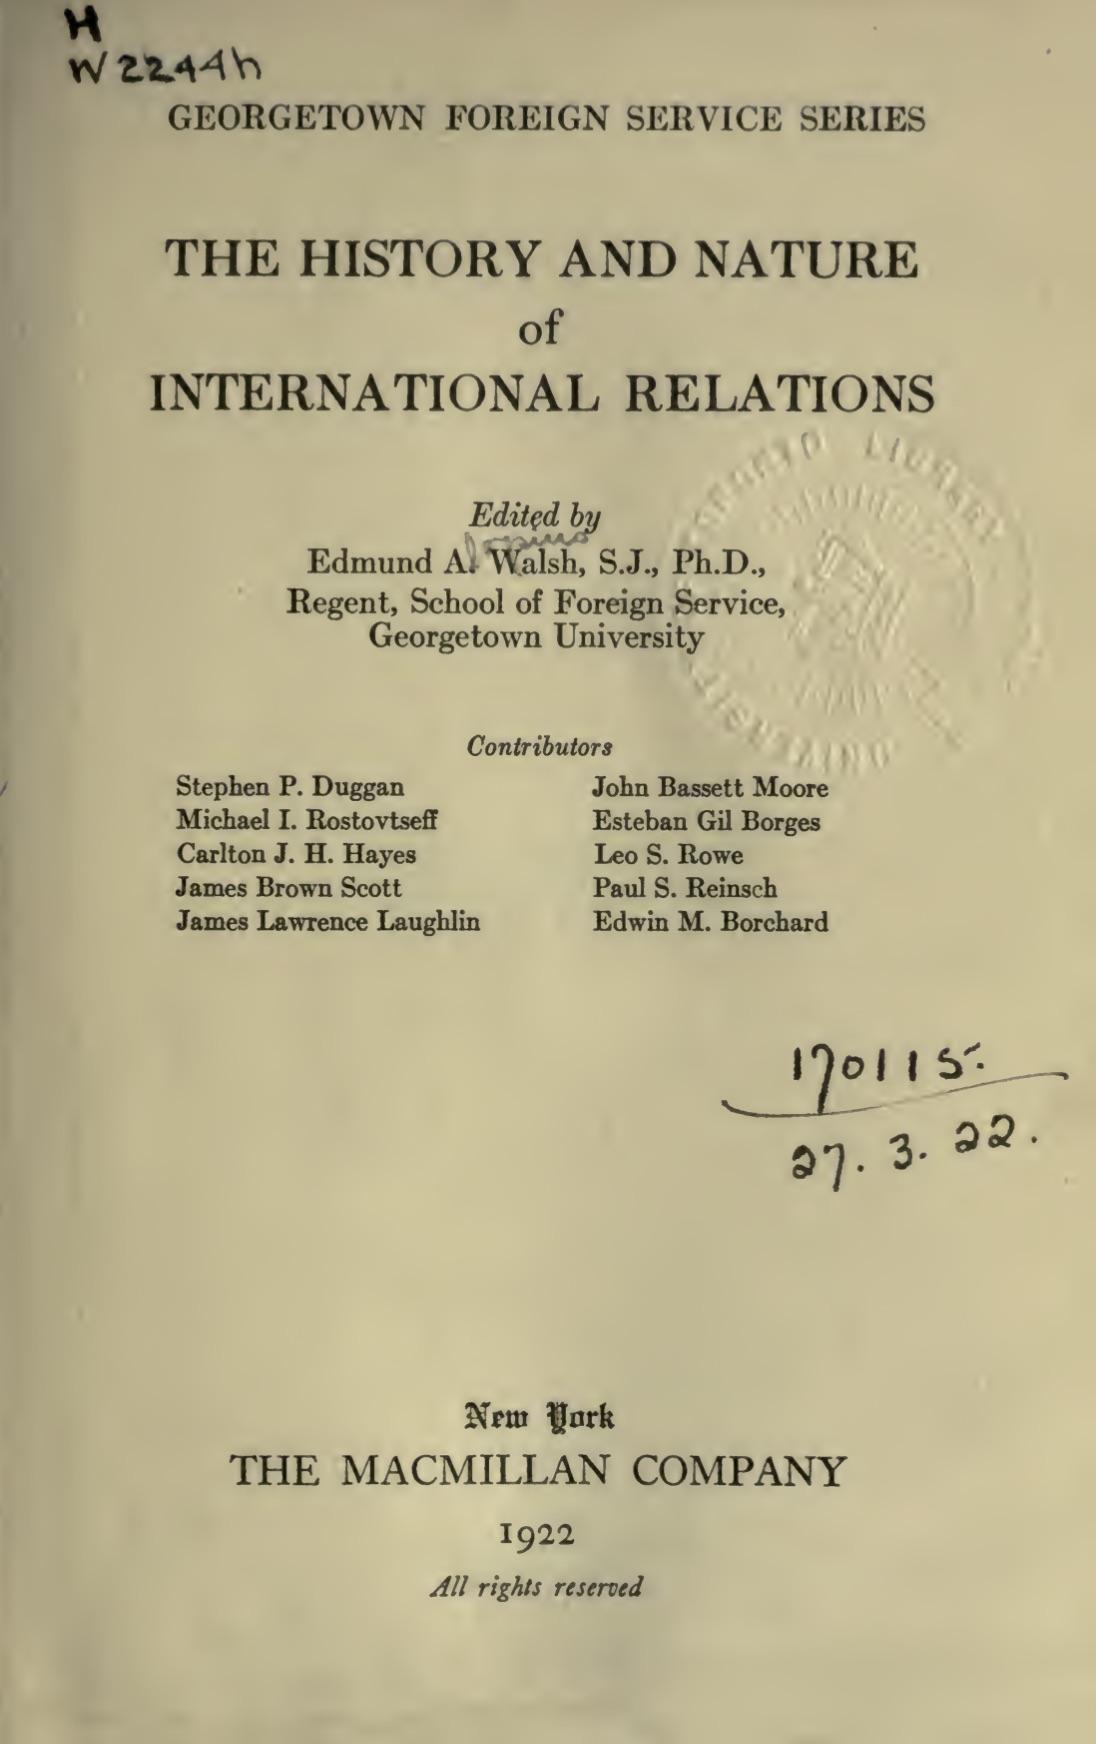 The History and Nature of International Relations (1921) by Edmund Aloysius Walsh